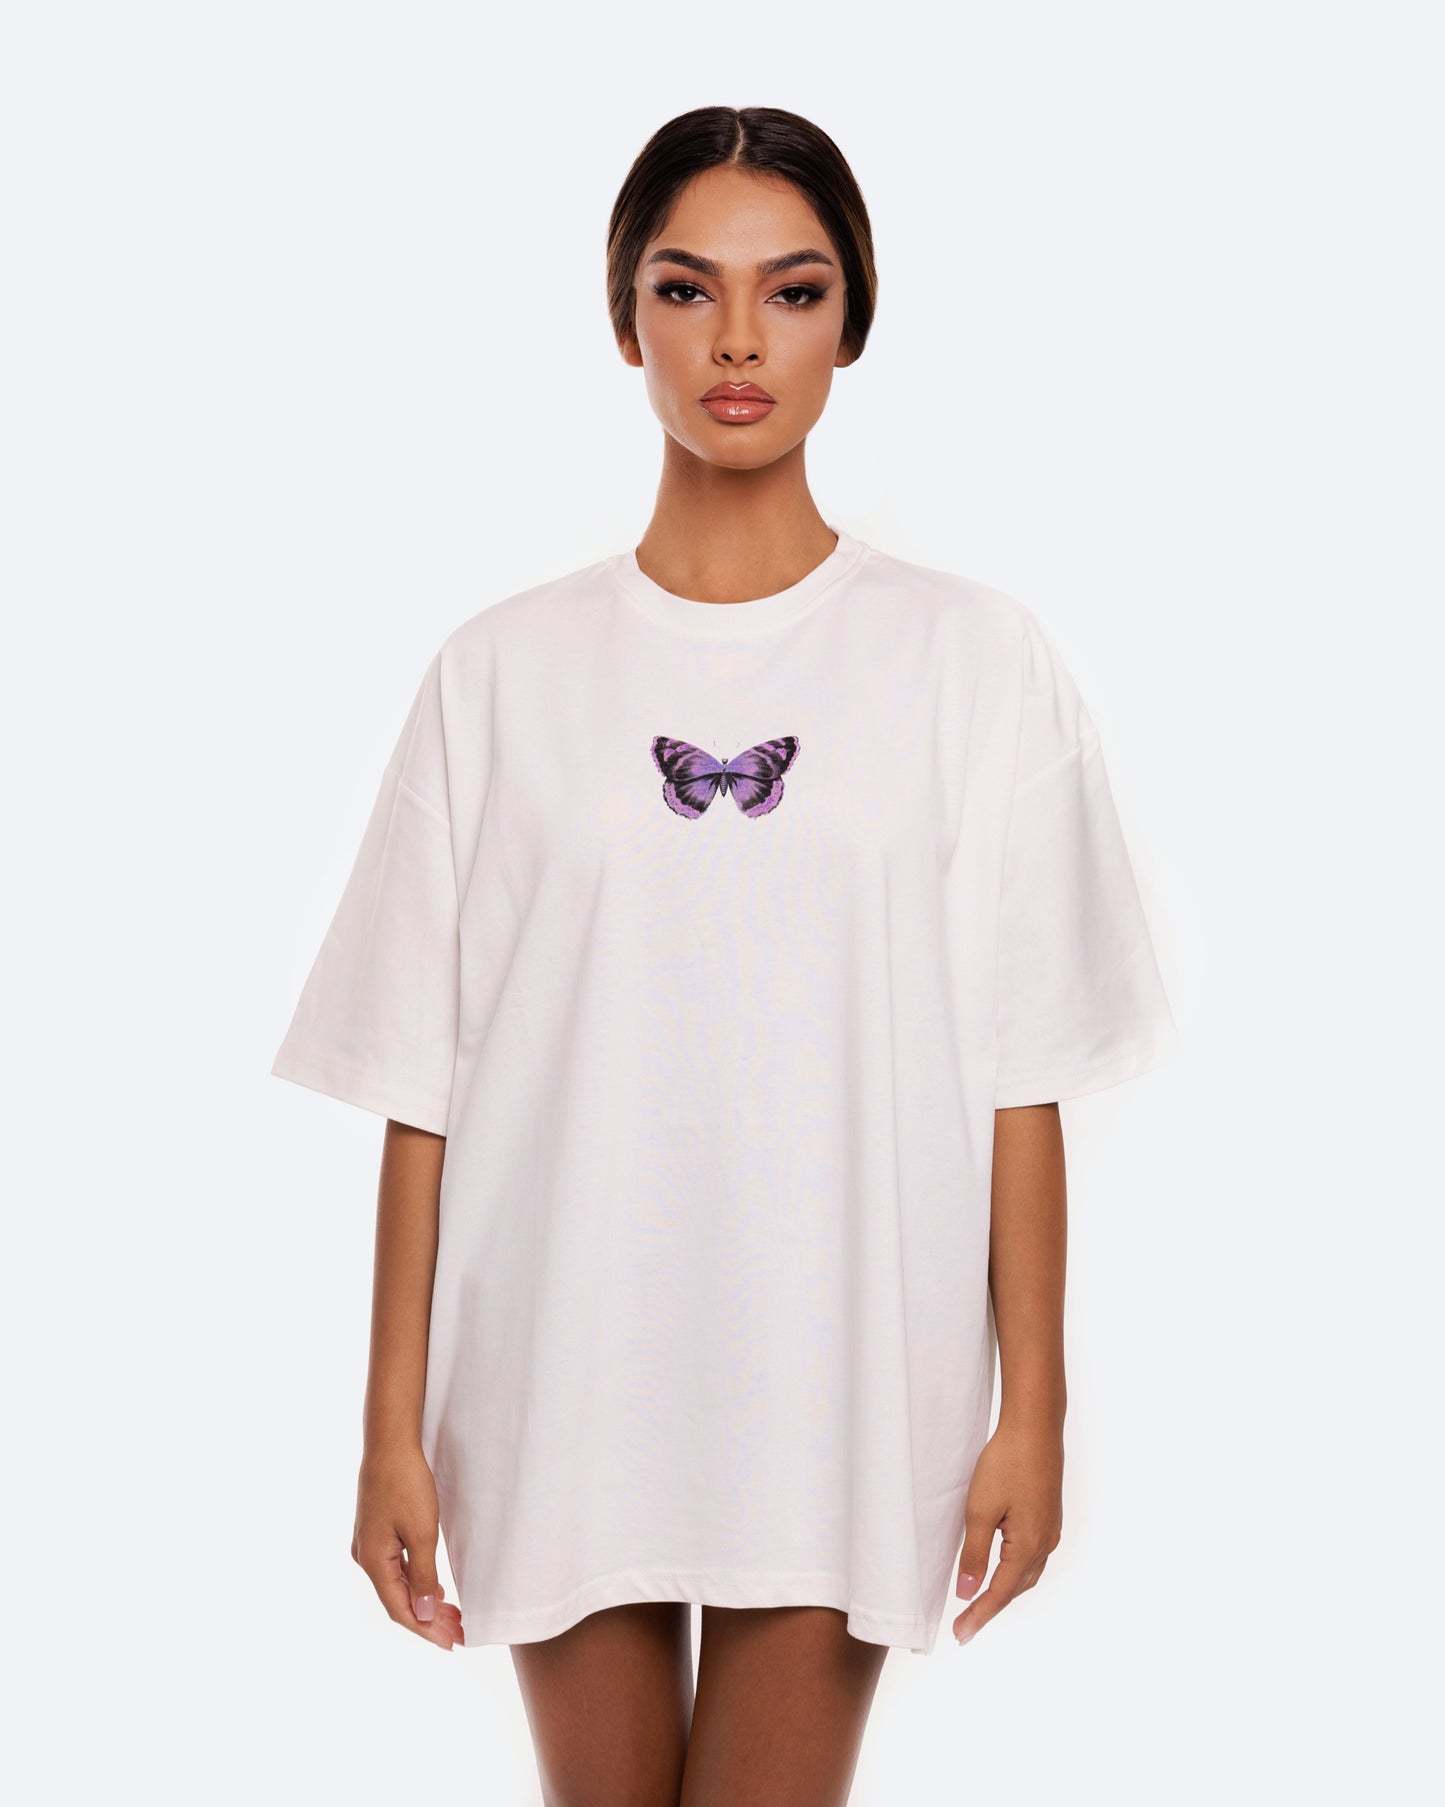 Butterfly White Unisex